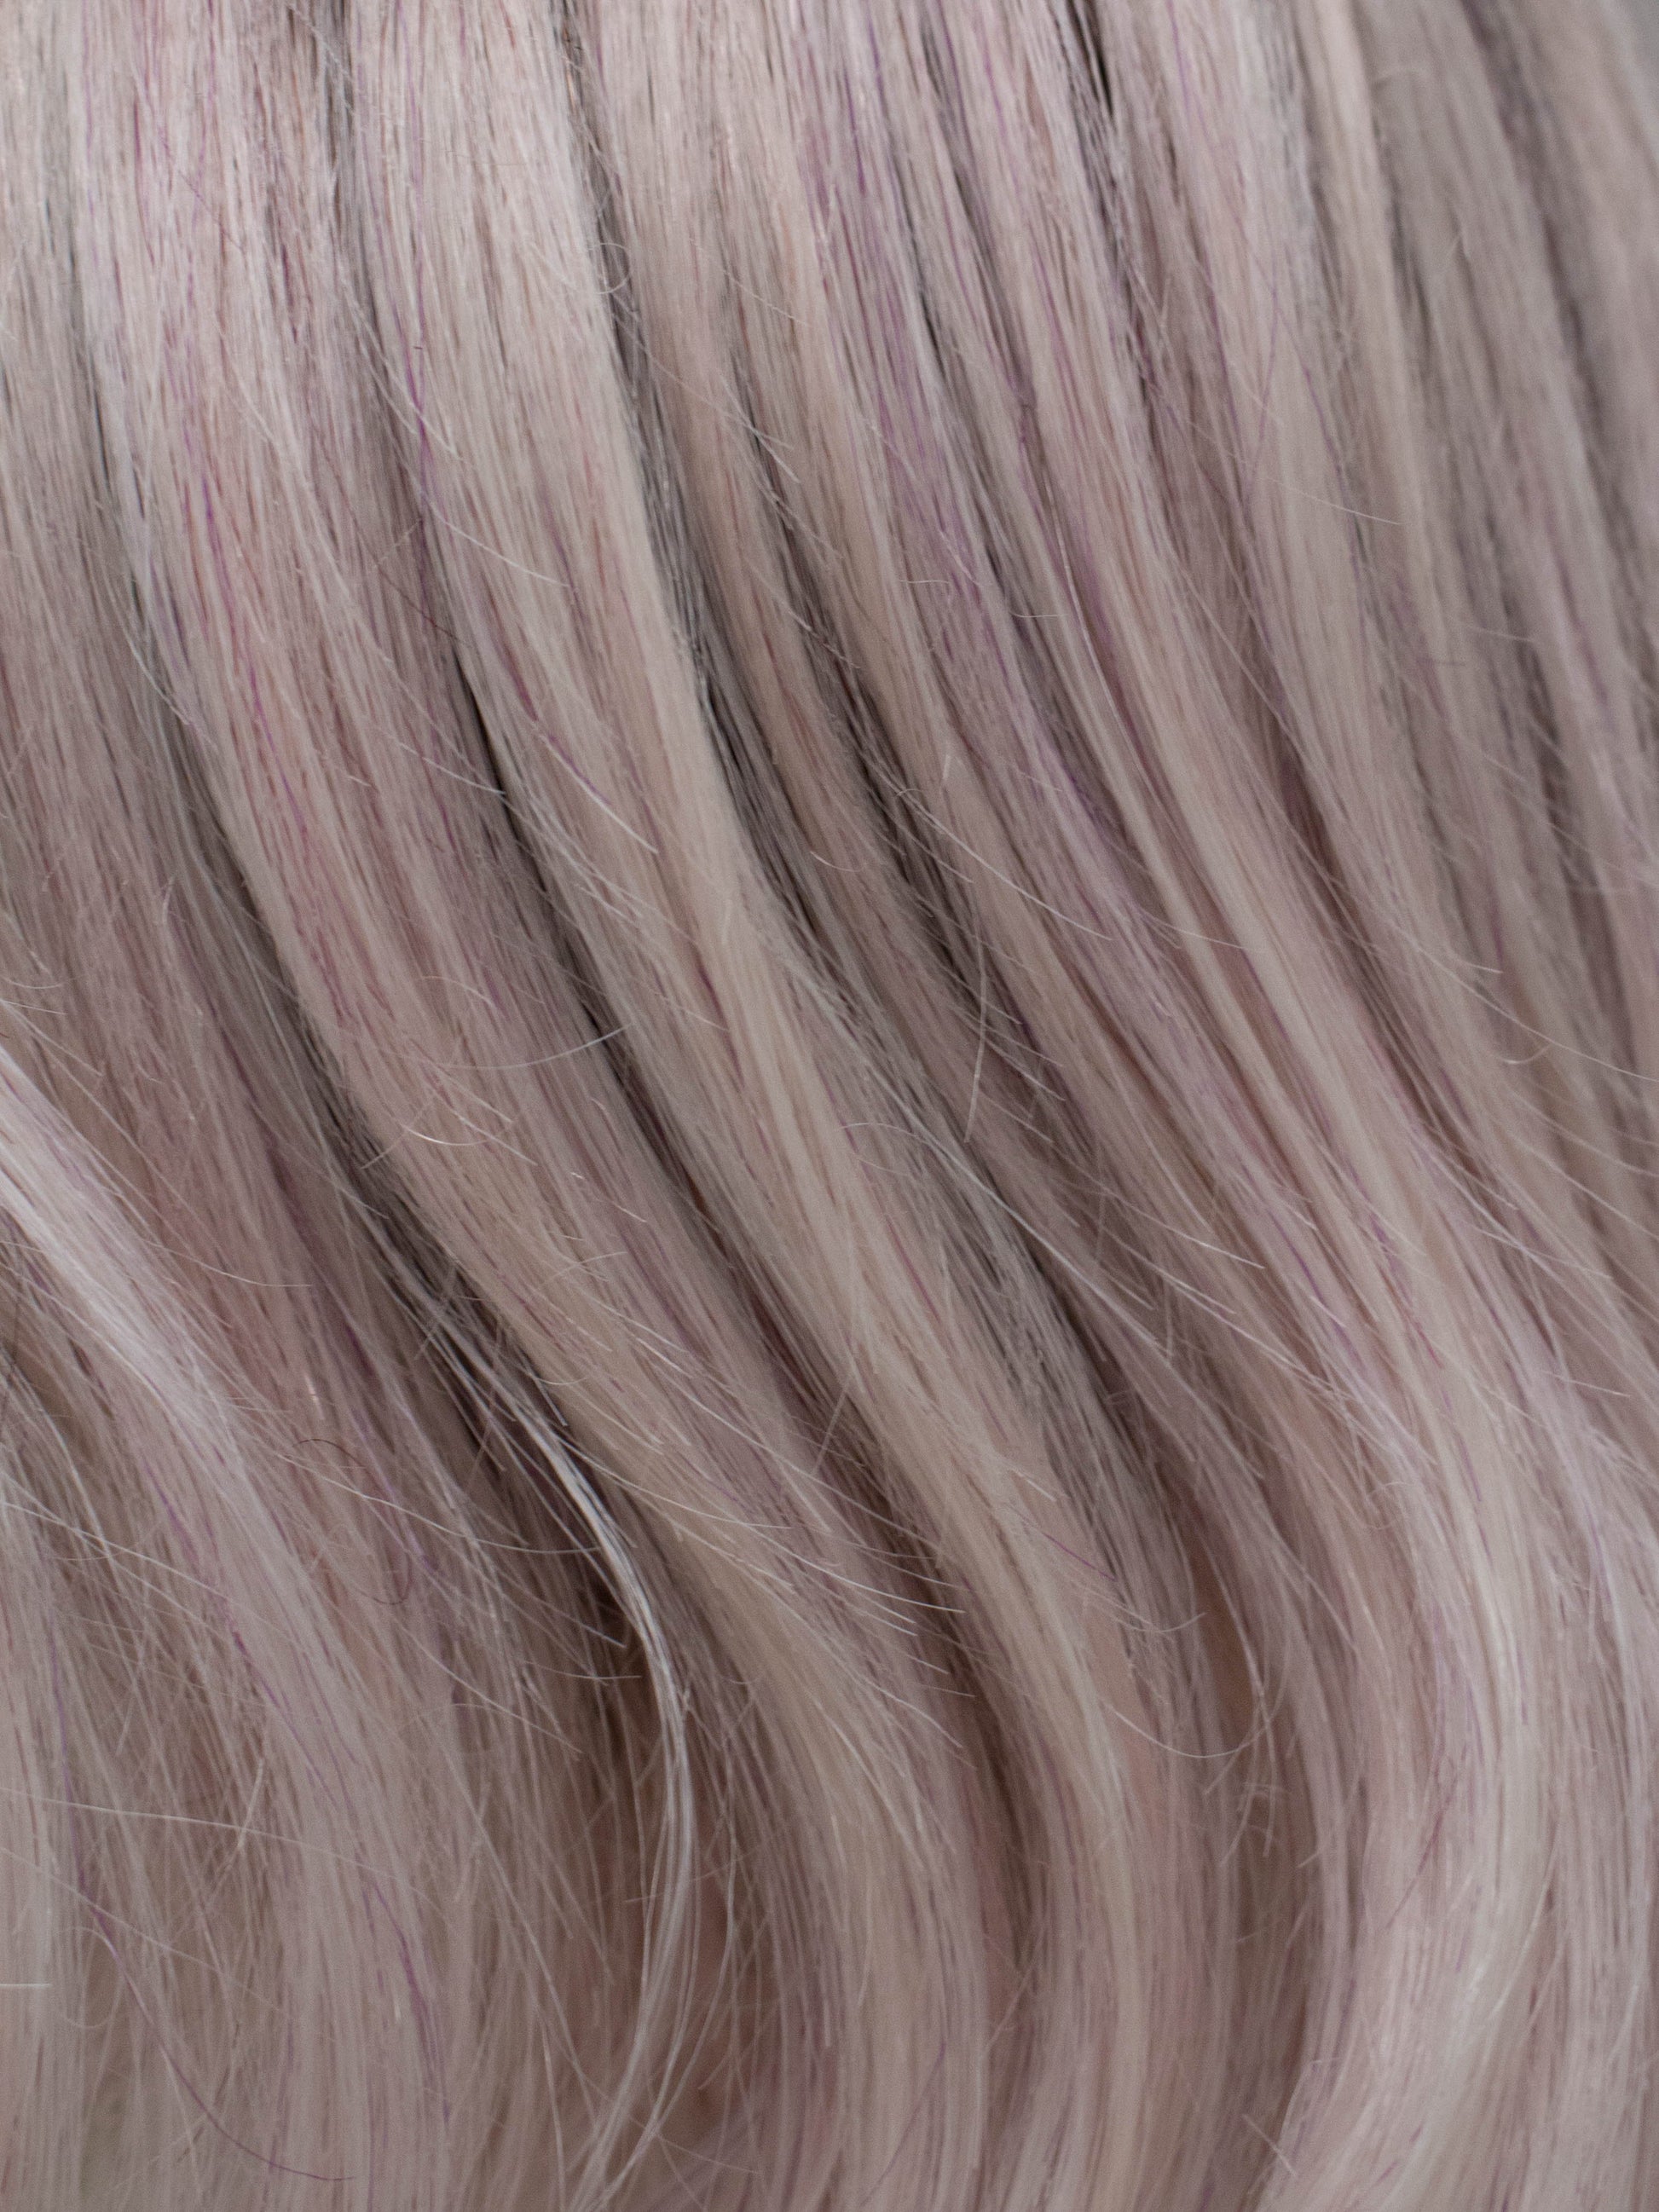 ICED-LAVENDER | Light Lavender Tones with a Rooted Top and Light Purple Hues Lavender Highlights